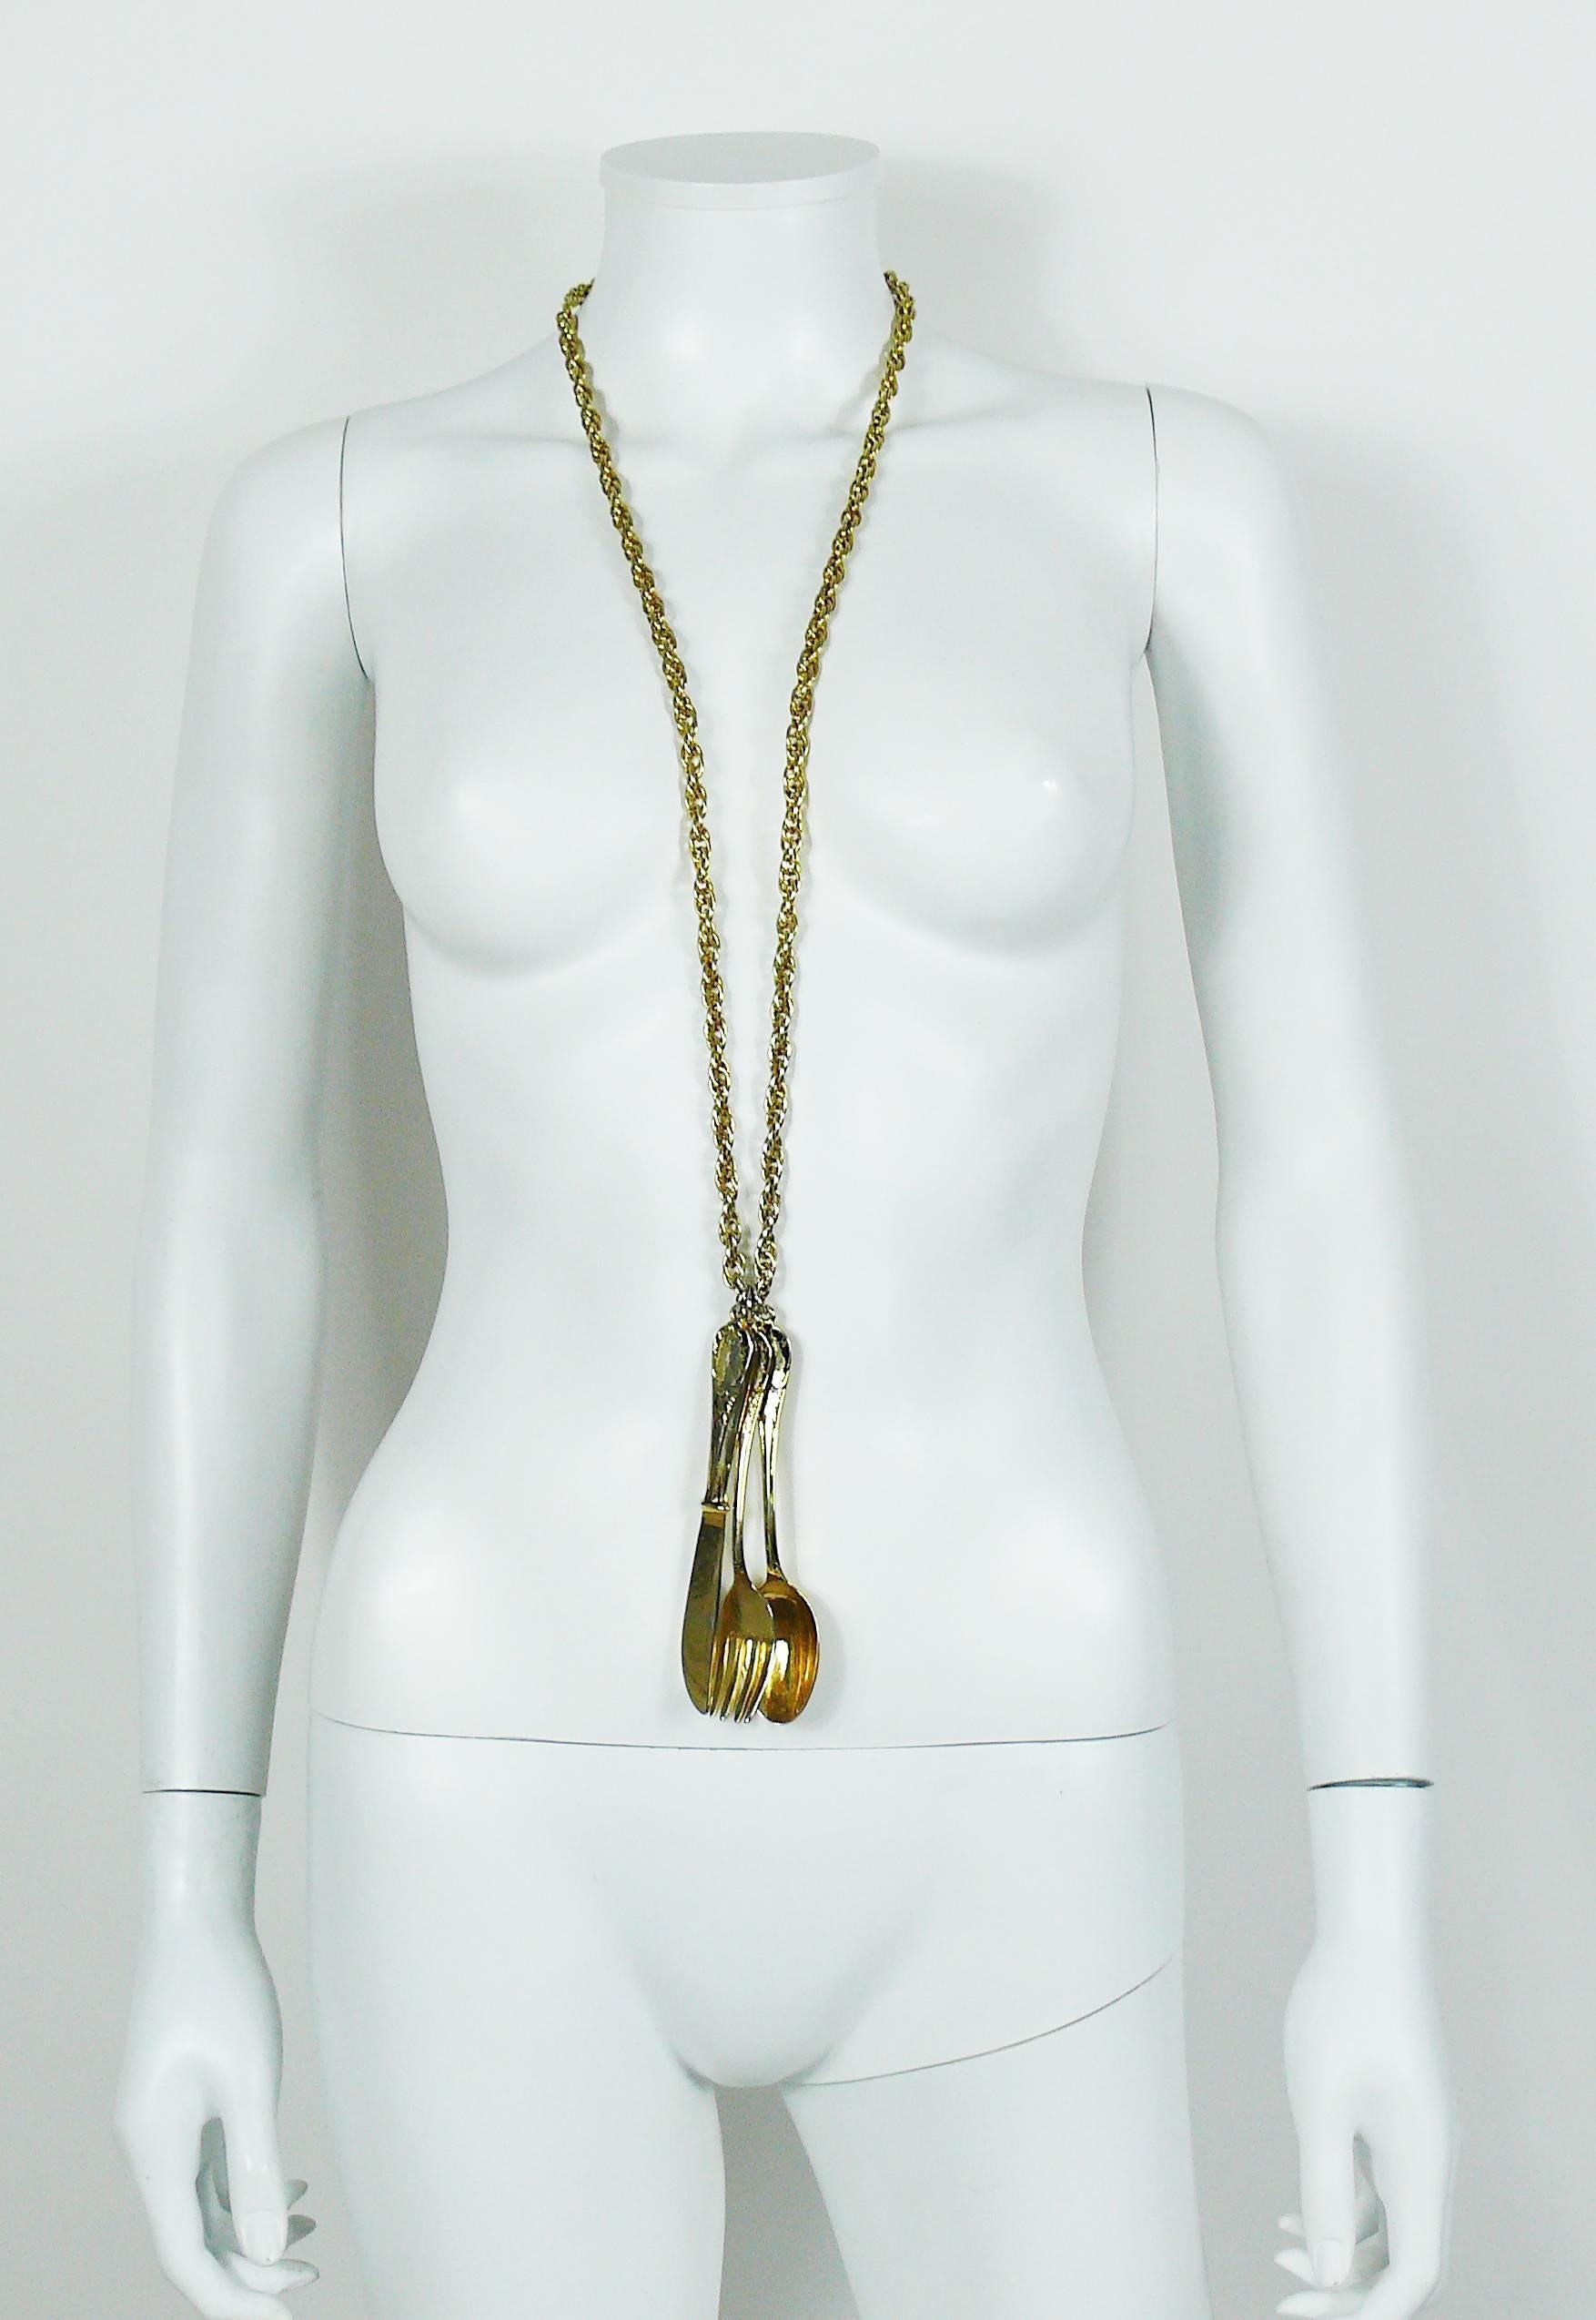 MOSCHINO vintage iconic 1989 gold toned with antique patina cutlery dinner sautoir necklace and spoon brooch set.

A very rare find from FRANCO MOSCHINO era.

All pieces embossed MOSCHINO.

NECKLACE indicative measurement : chain total length